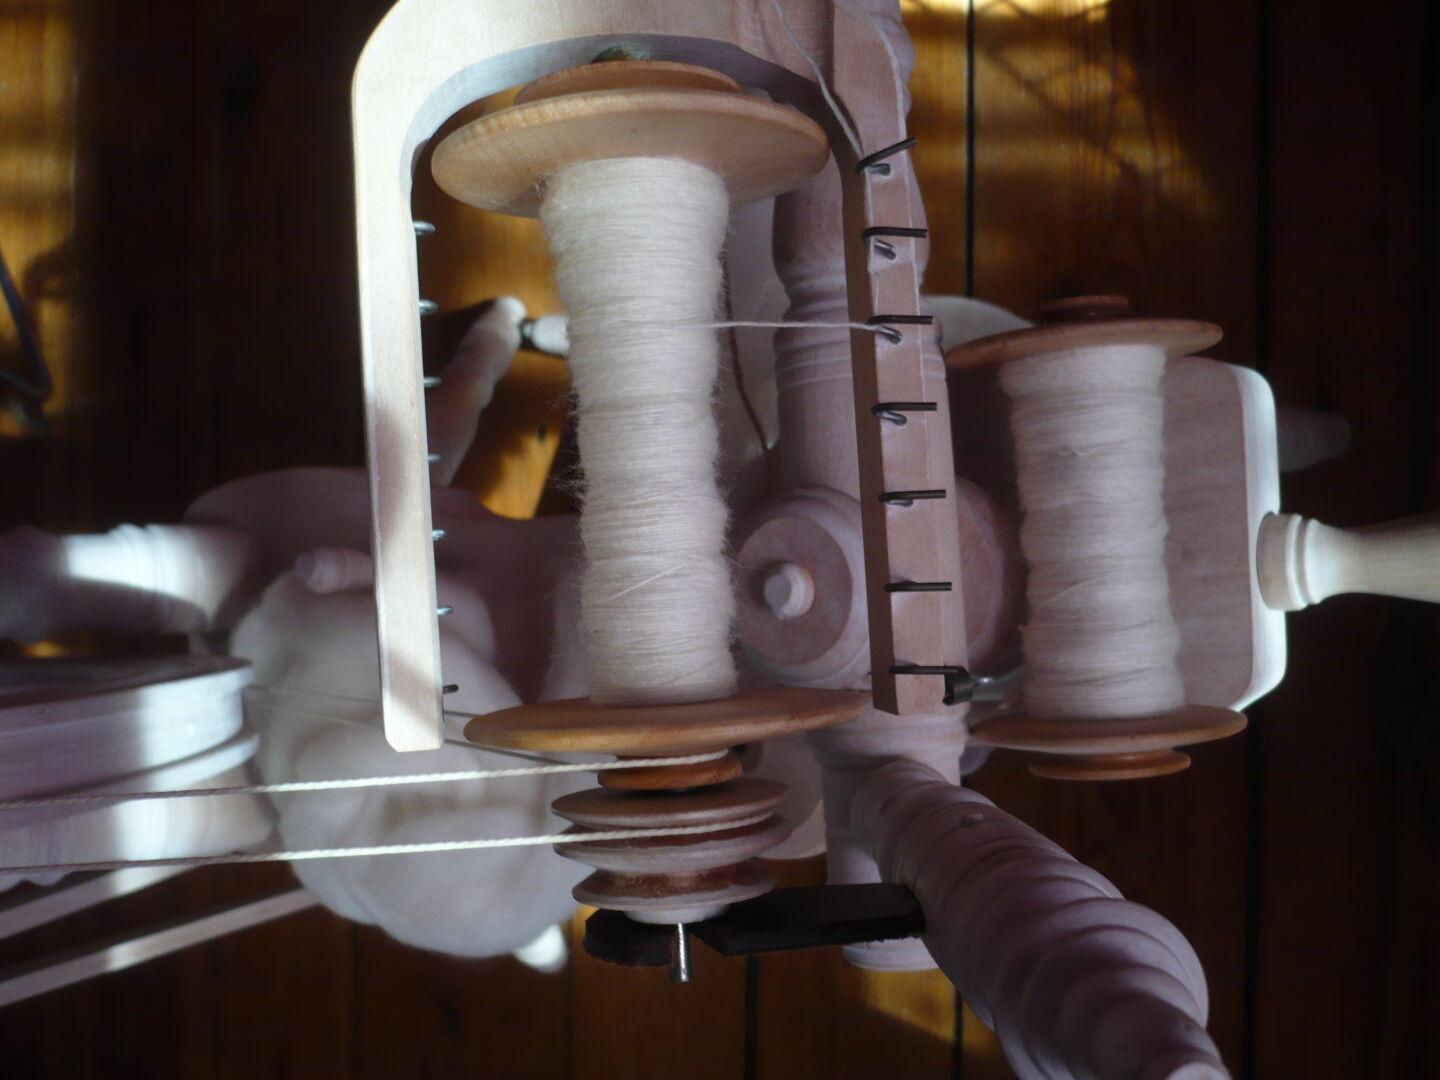 view of a spinning wheel from above, some white handspun on the bobbin, another bobbin placed below filled with white handspun.